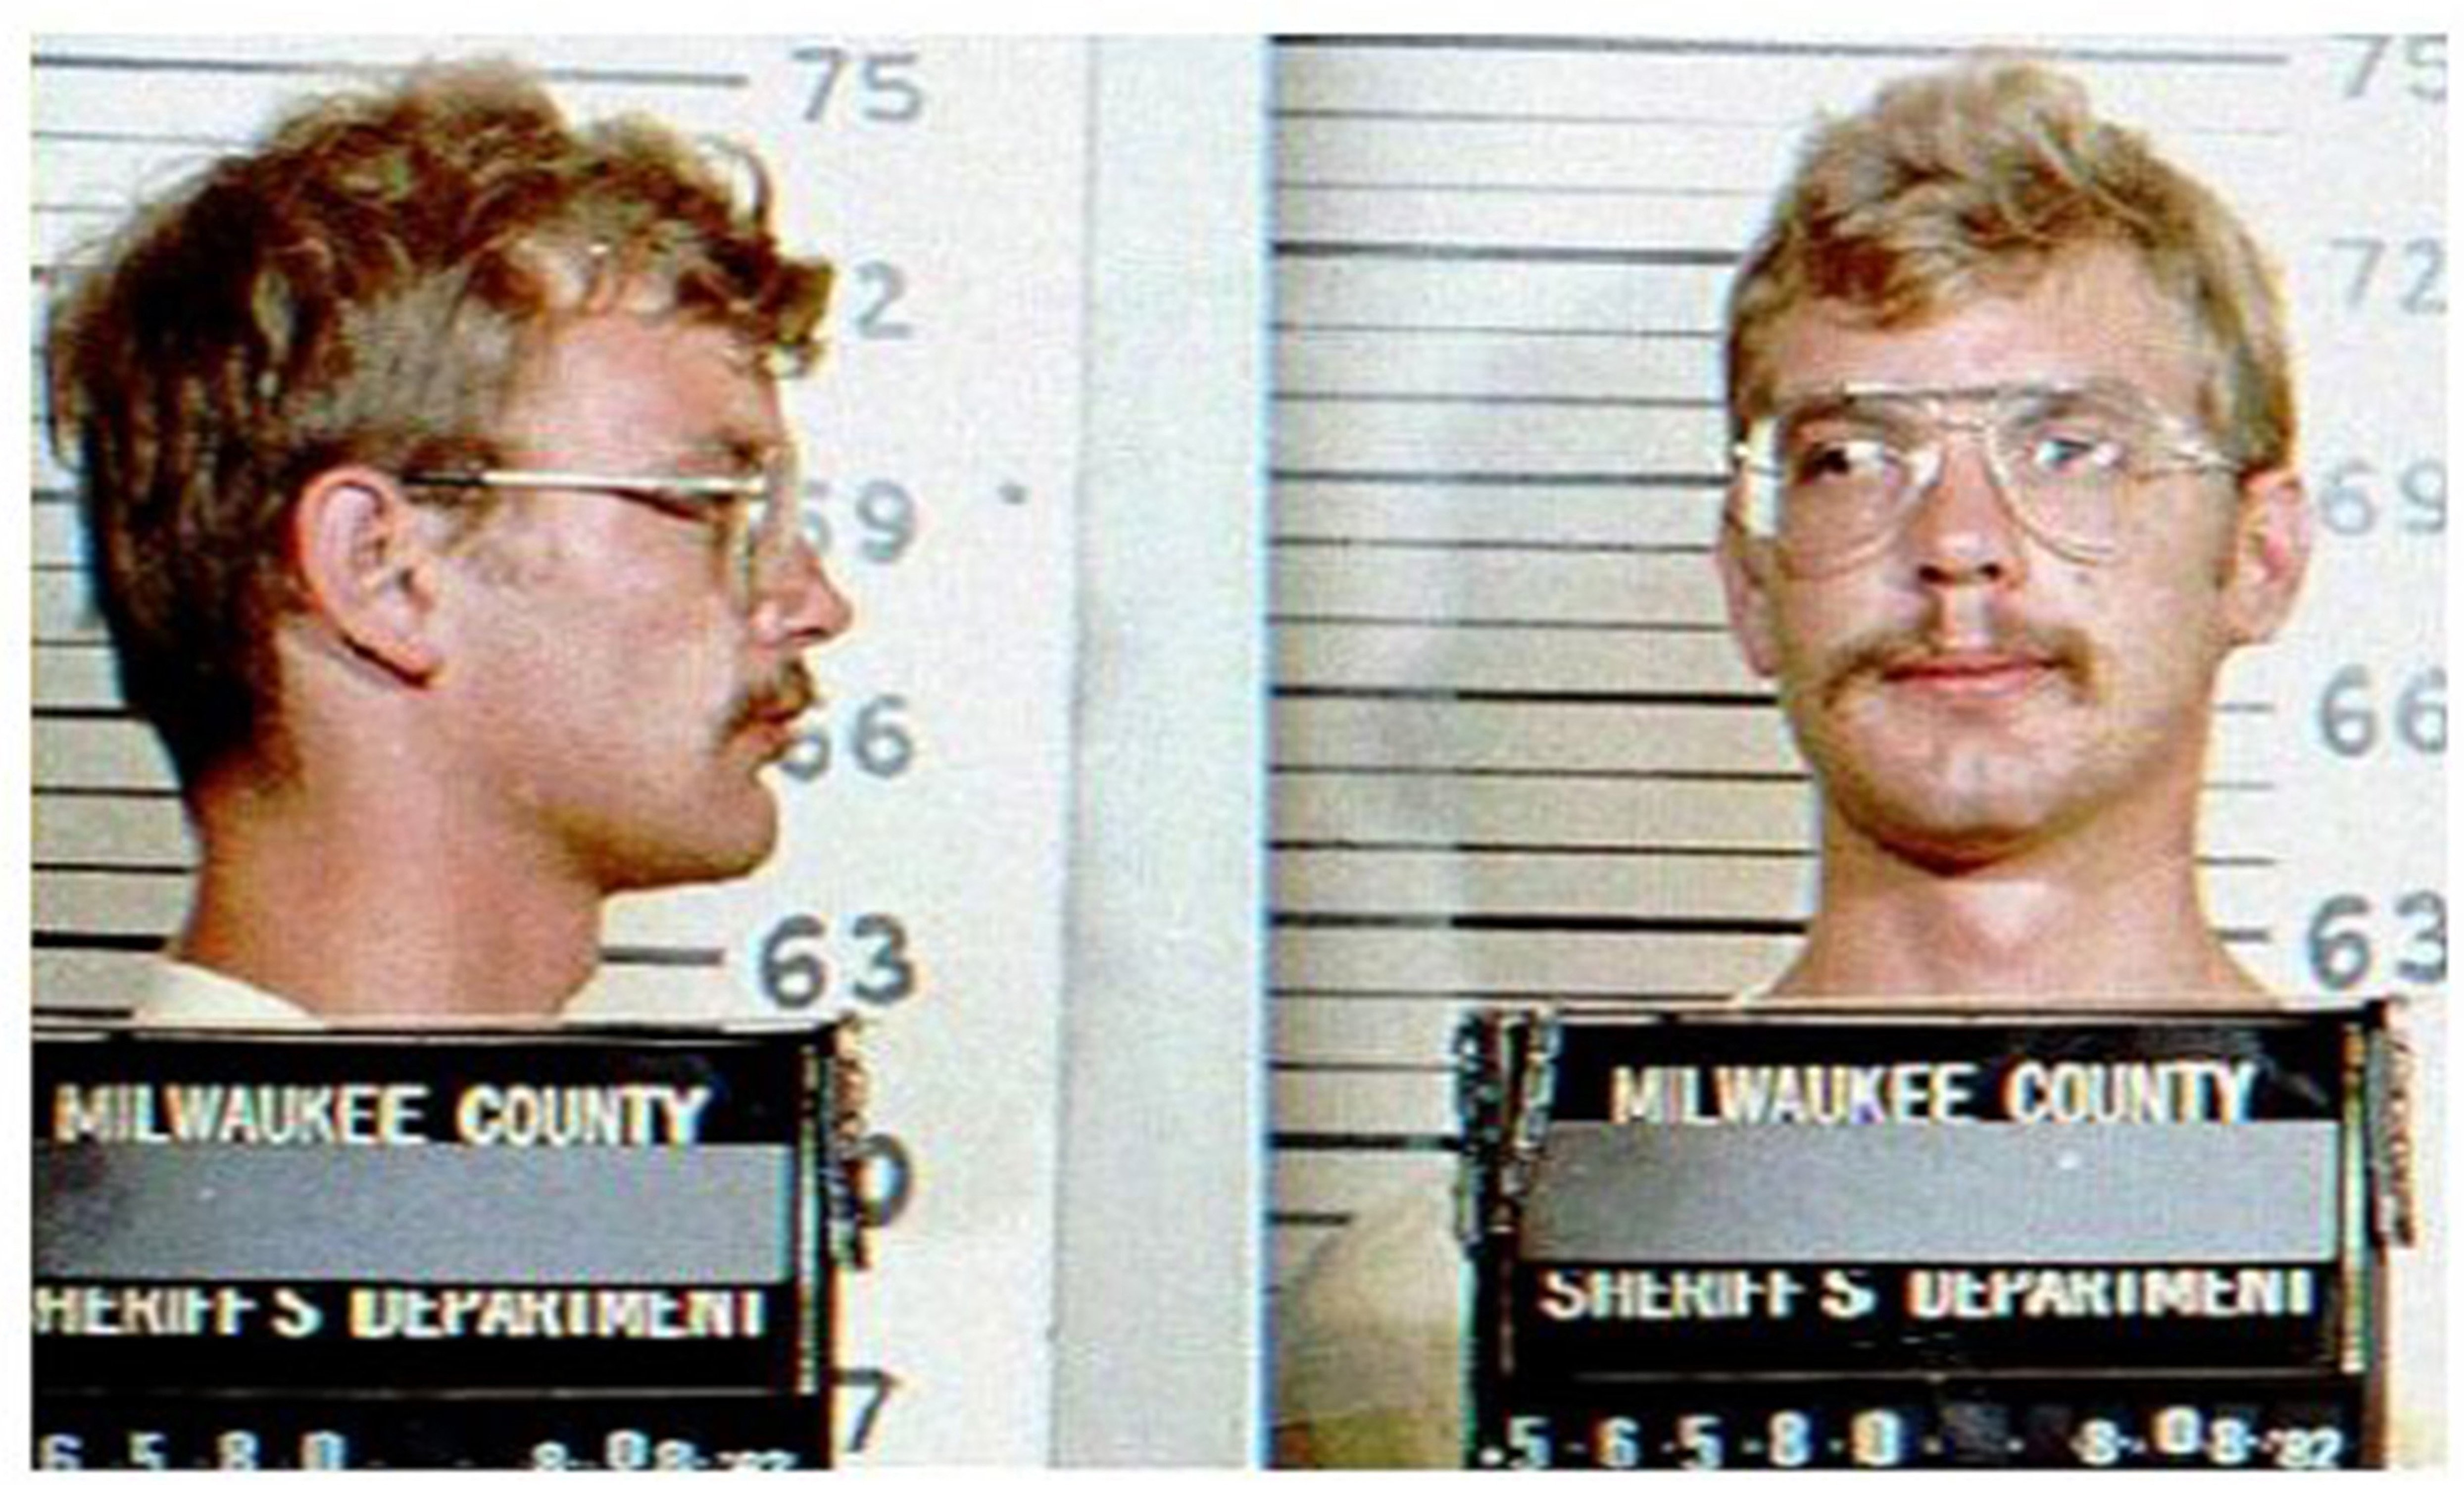 American serial killer Jeffrey Dahmer, who was placed under arrest four times before his murder conviction in 1992